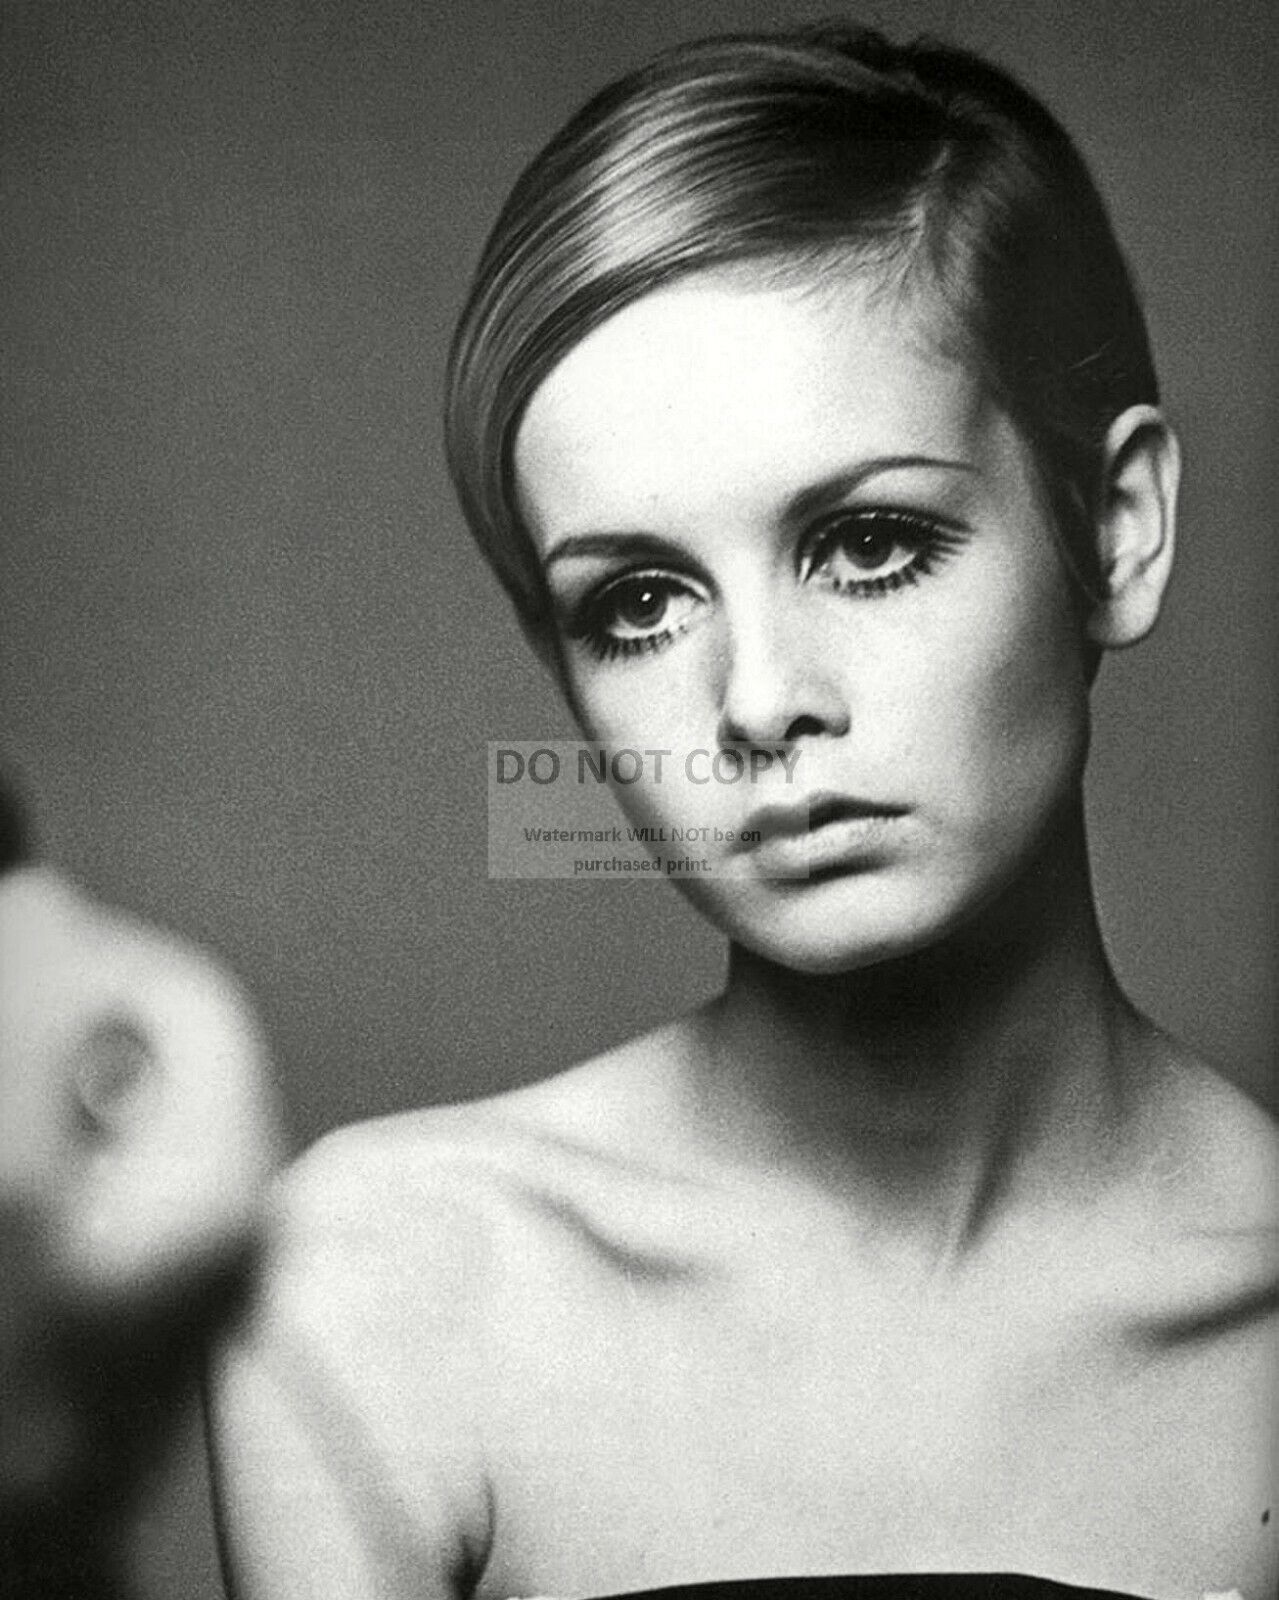 TWIGGY ENGLISH MODEL, ACTRESS AND SINGER - 8X10 PUBLICITY PHOTO (EE-096)